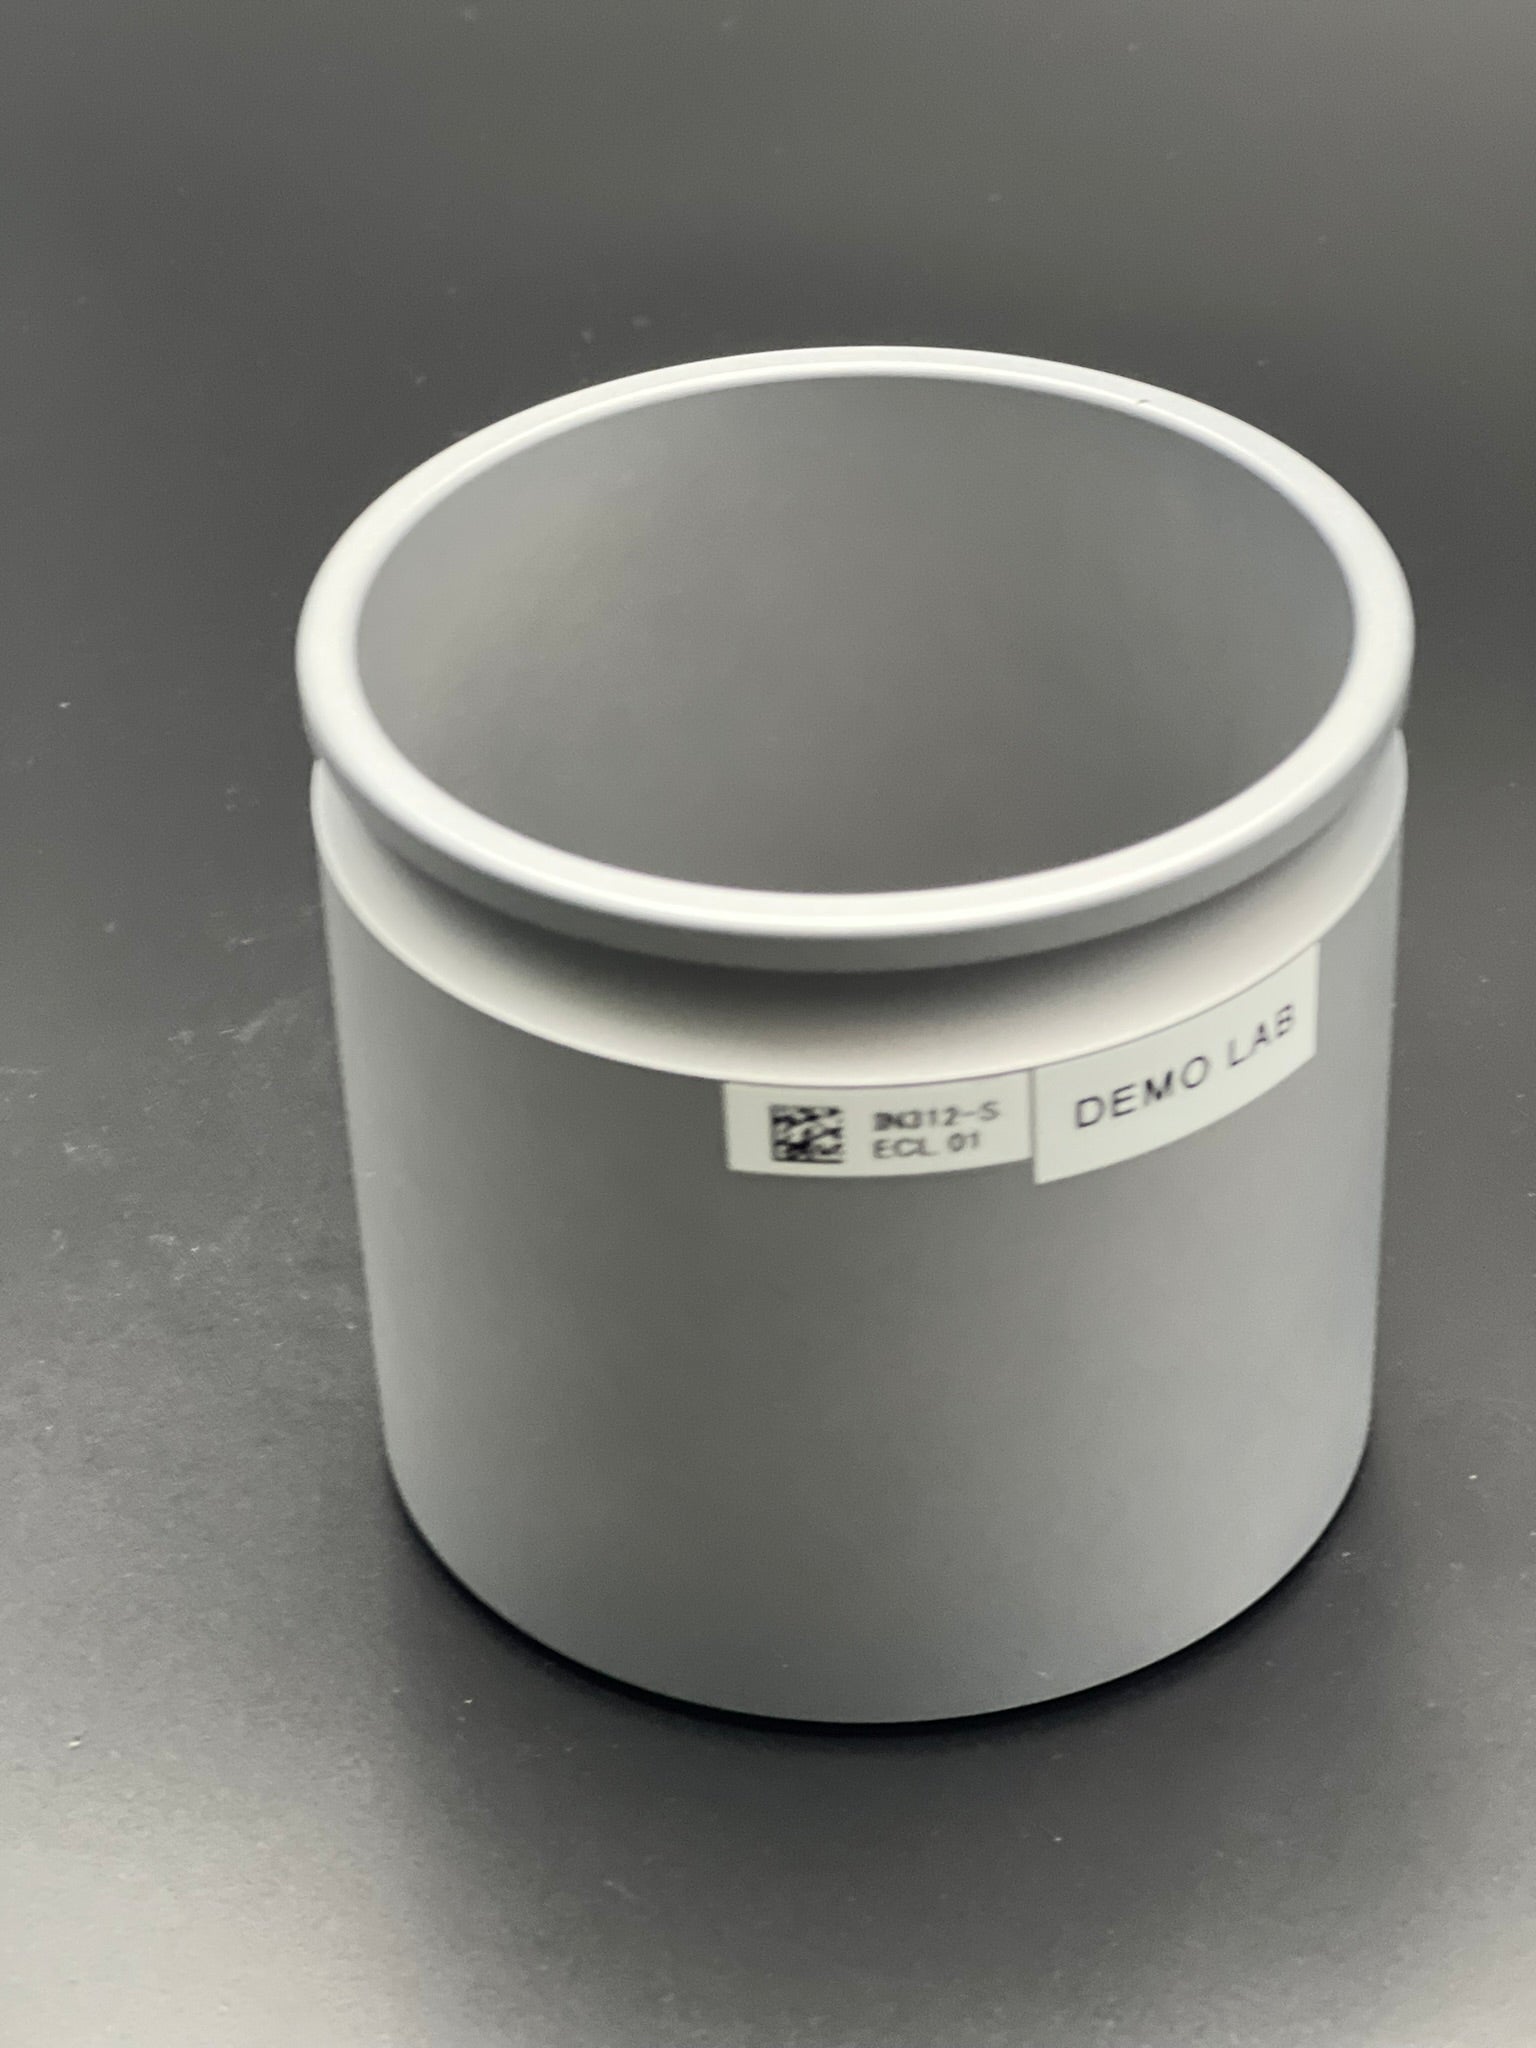 IN312-S: Sample Cup (97mm diameter) for MPA/TANGO, 90mm high